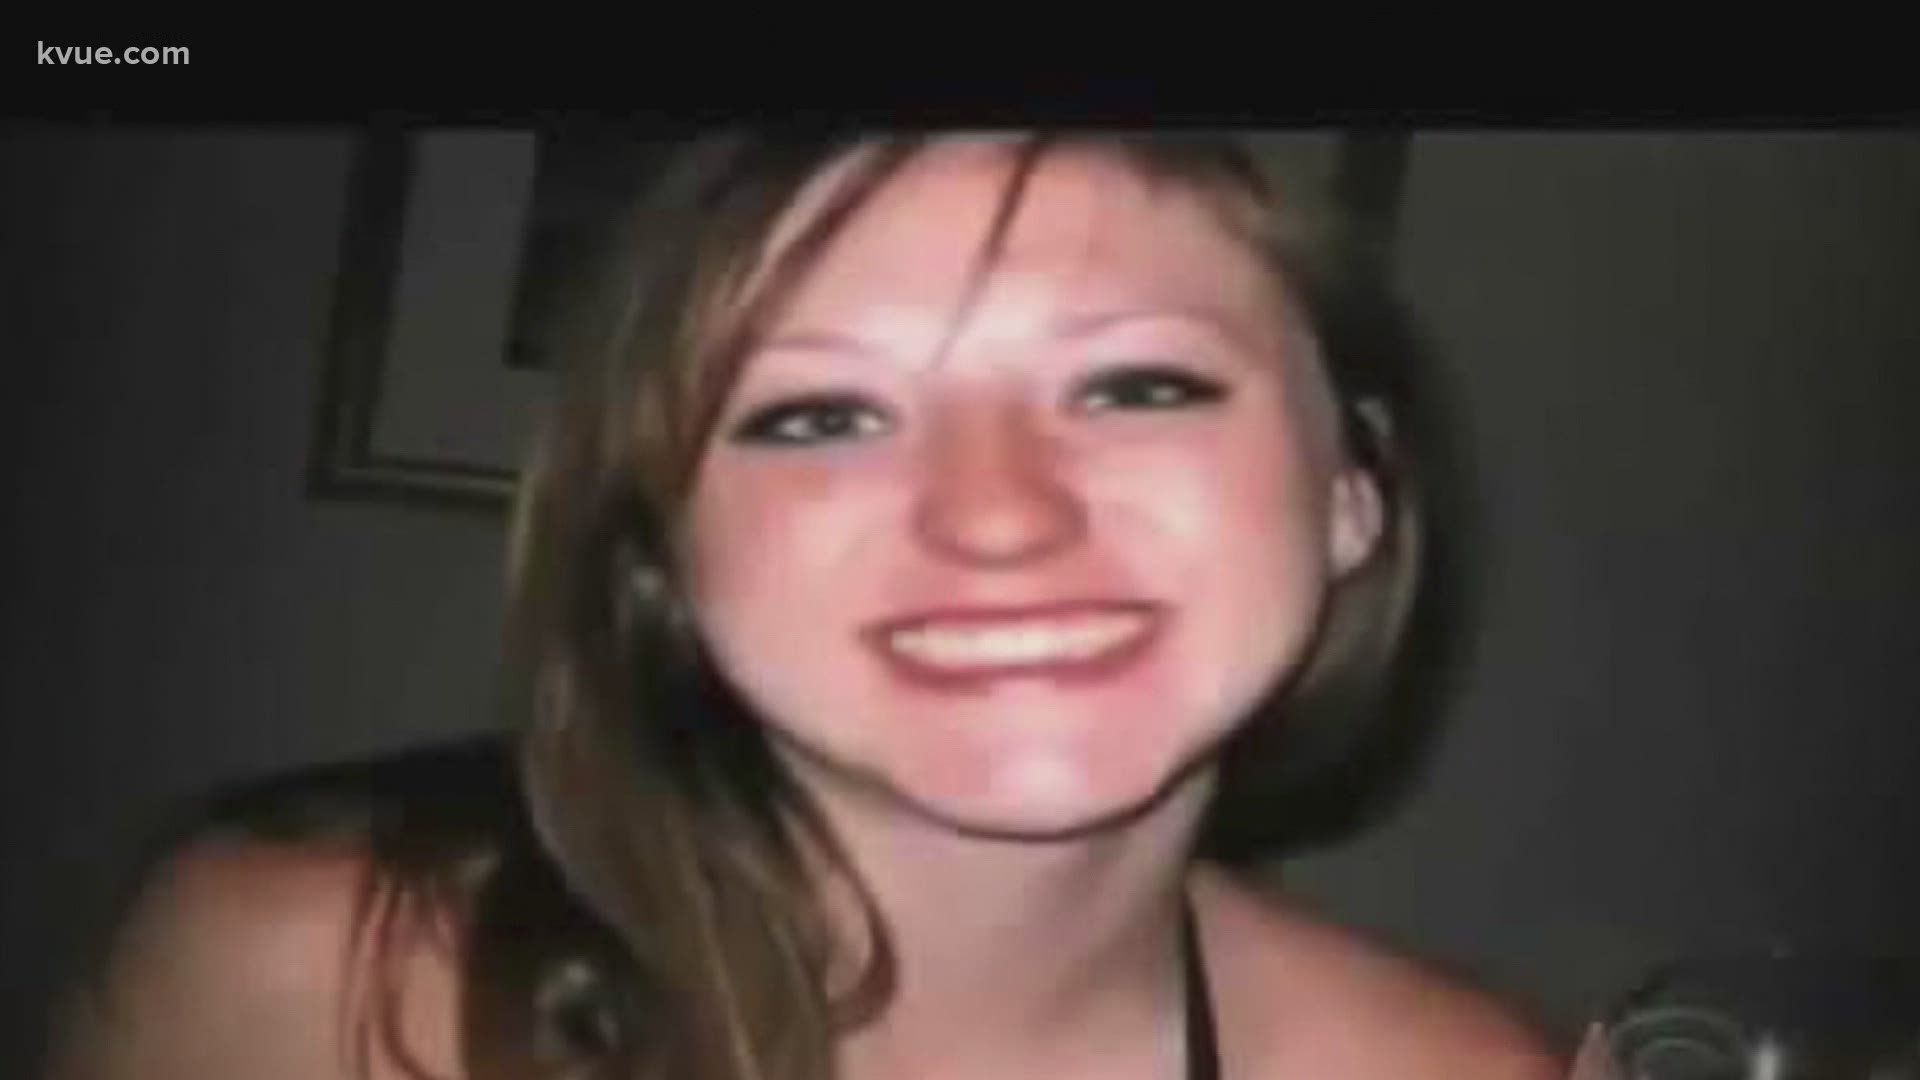 Jennifer Cave was just 21 years old when her body was found in a bathtub at a West Campus condominium near UT.